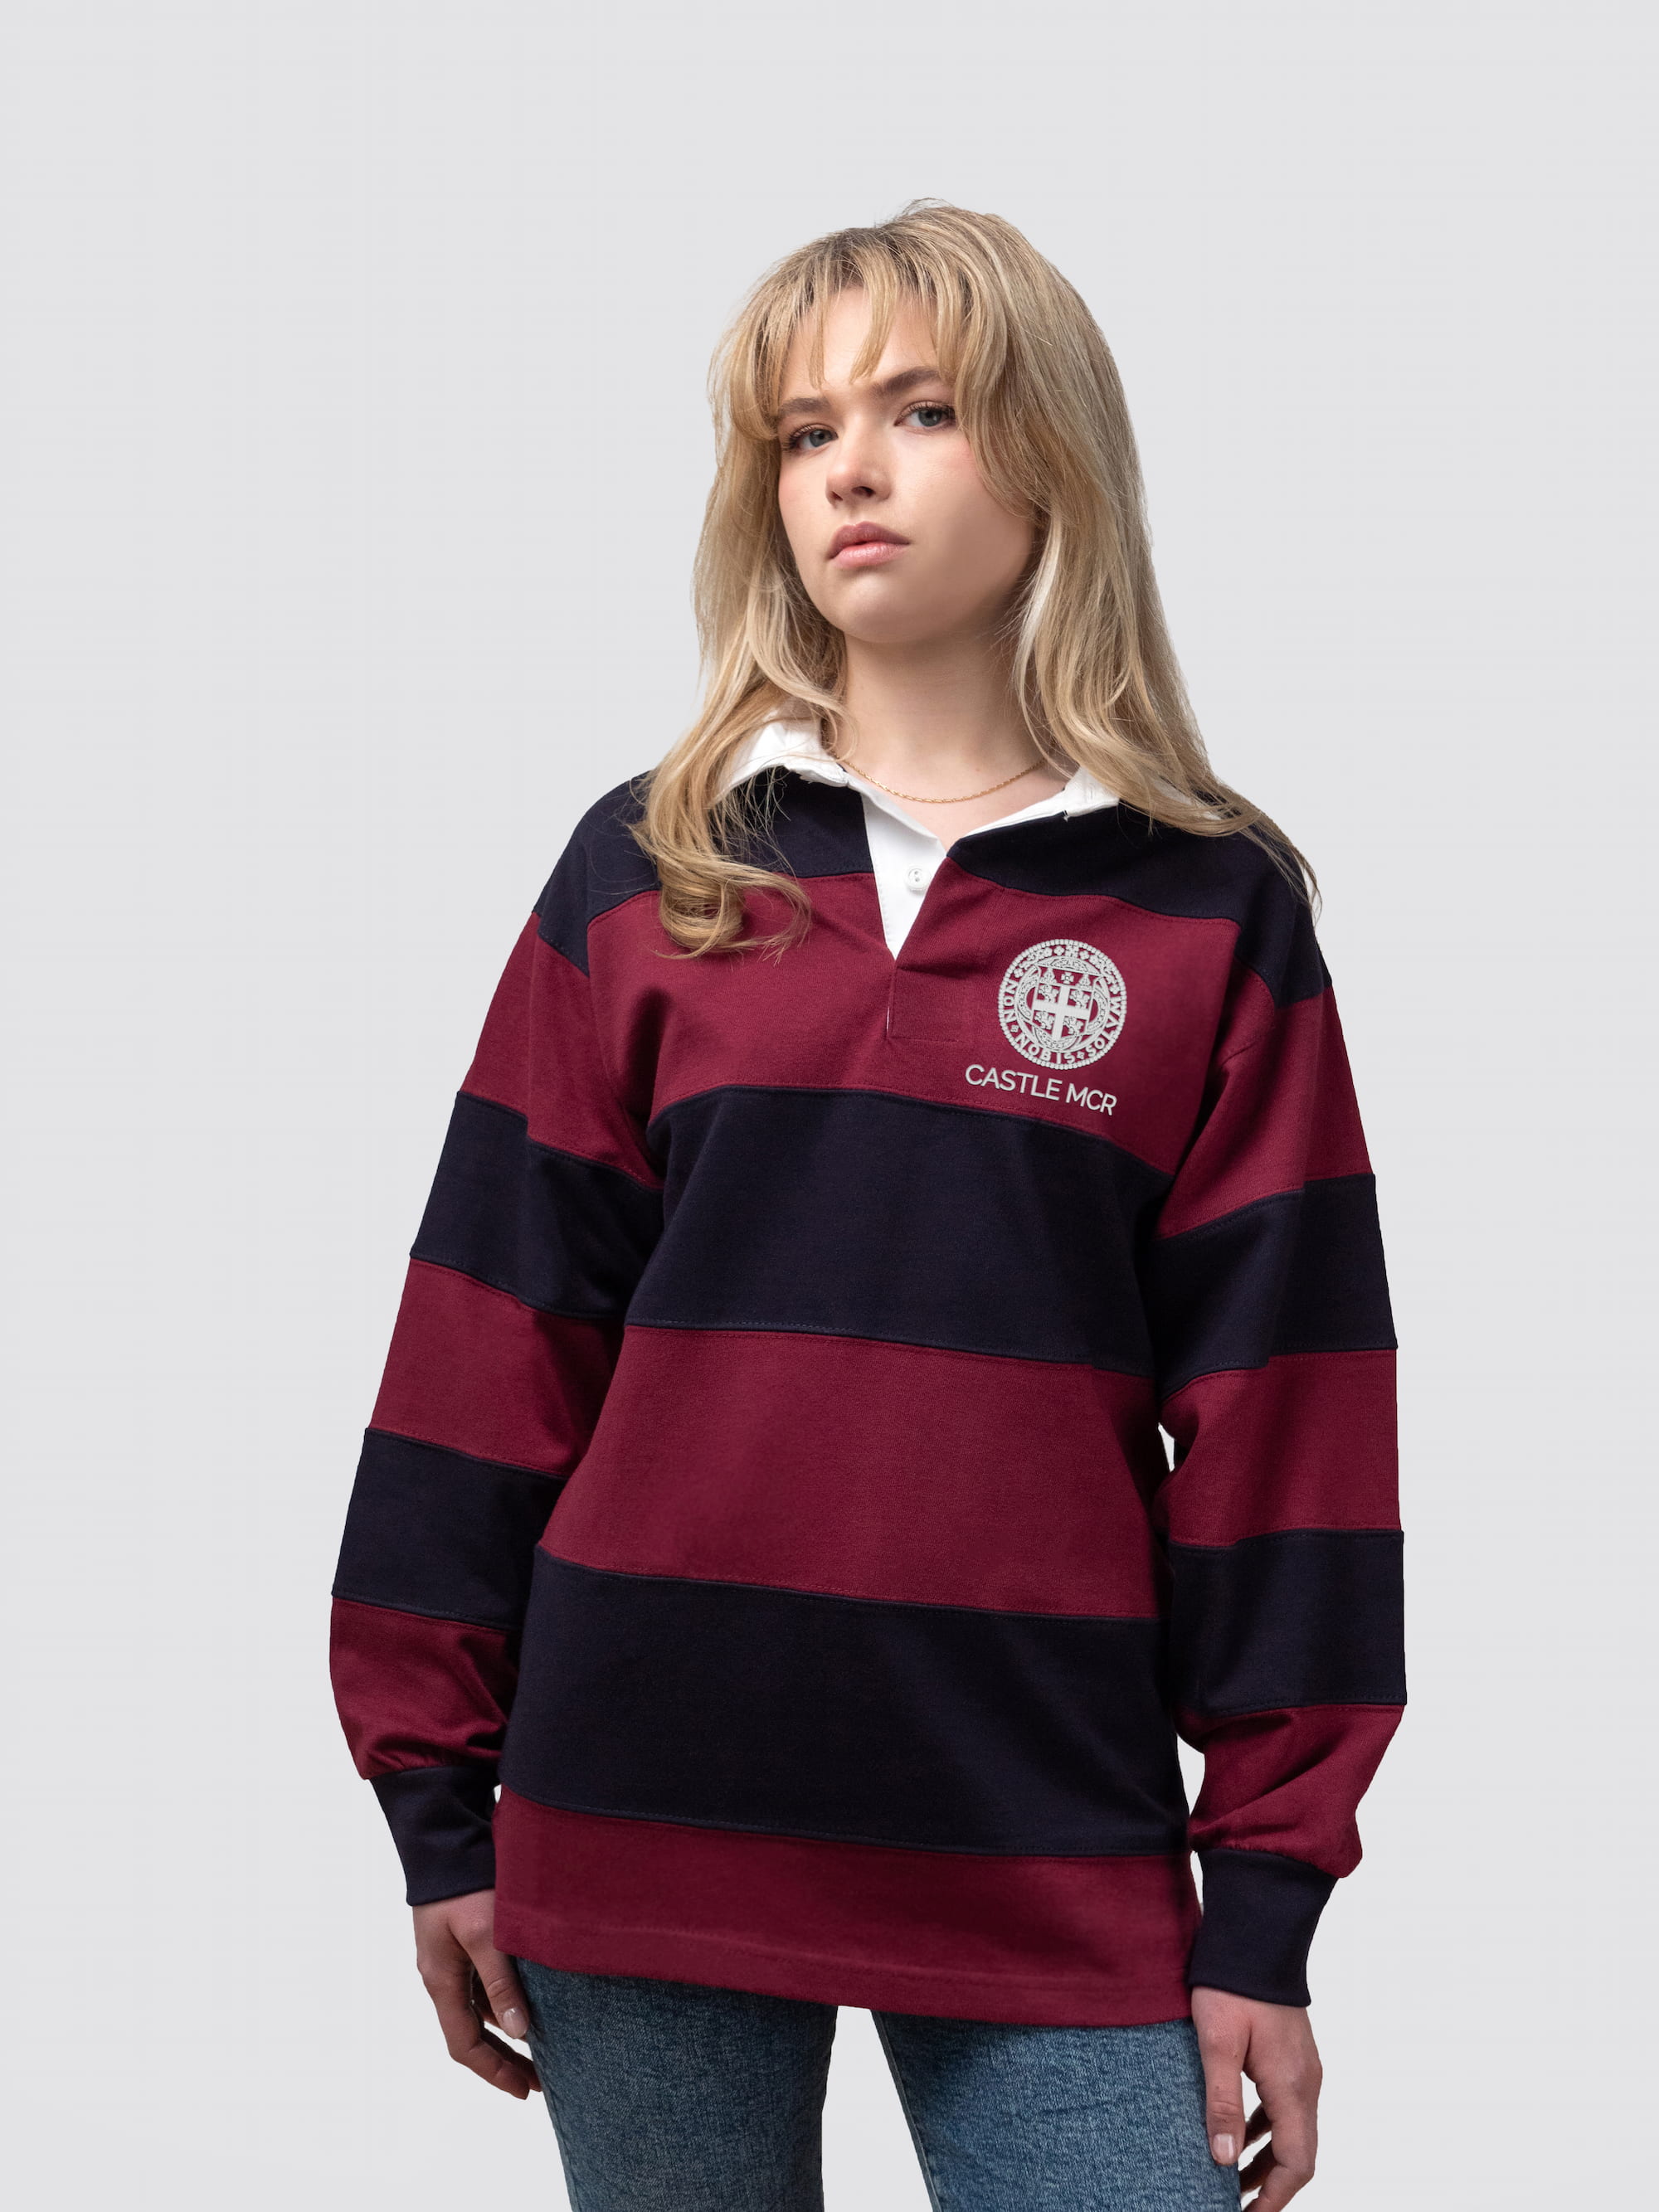 Castle MCR College rugby shirt, with burgundy and navy stripes